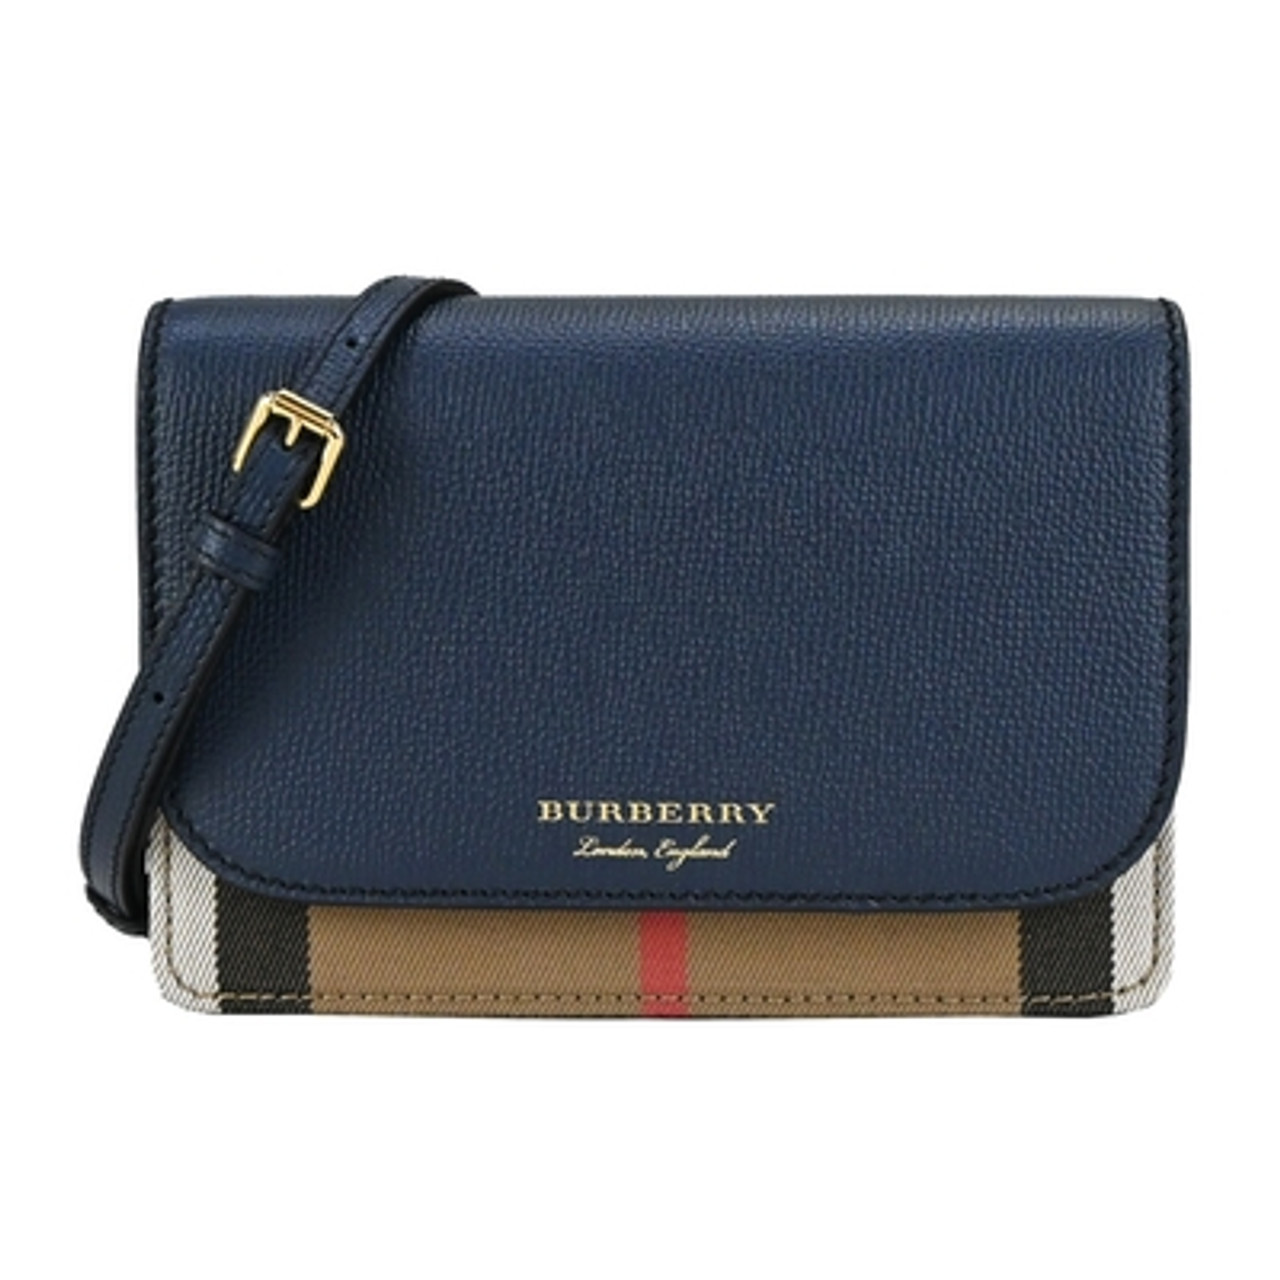 Vintage Burberry bag | Buy or Sell crossbody bags for women - Vestiaire  Collective